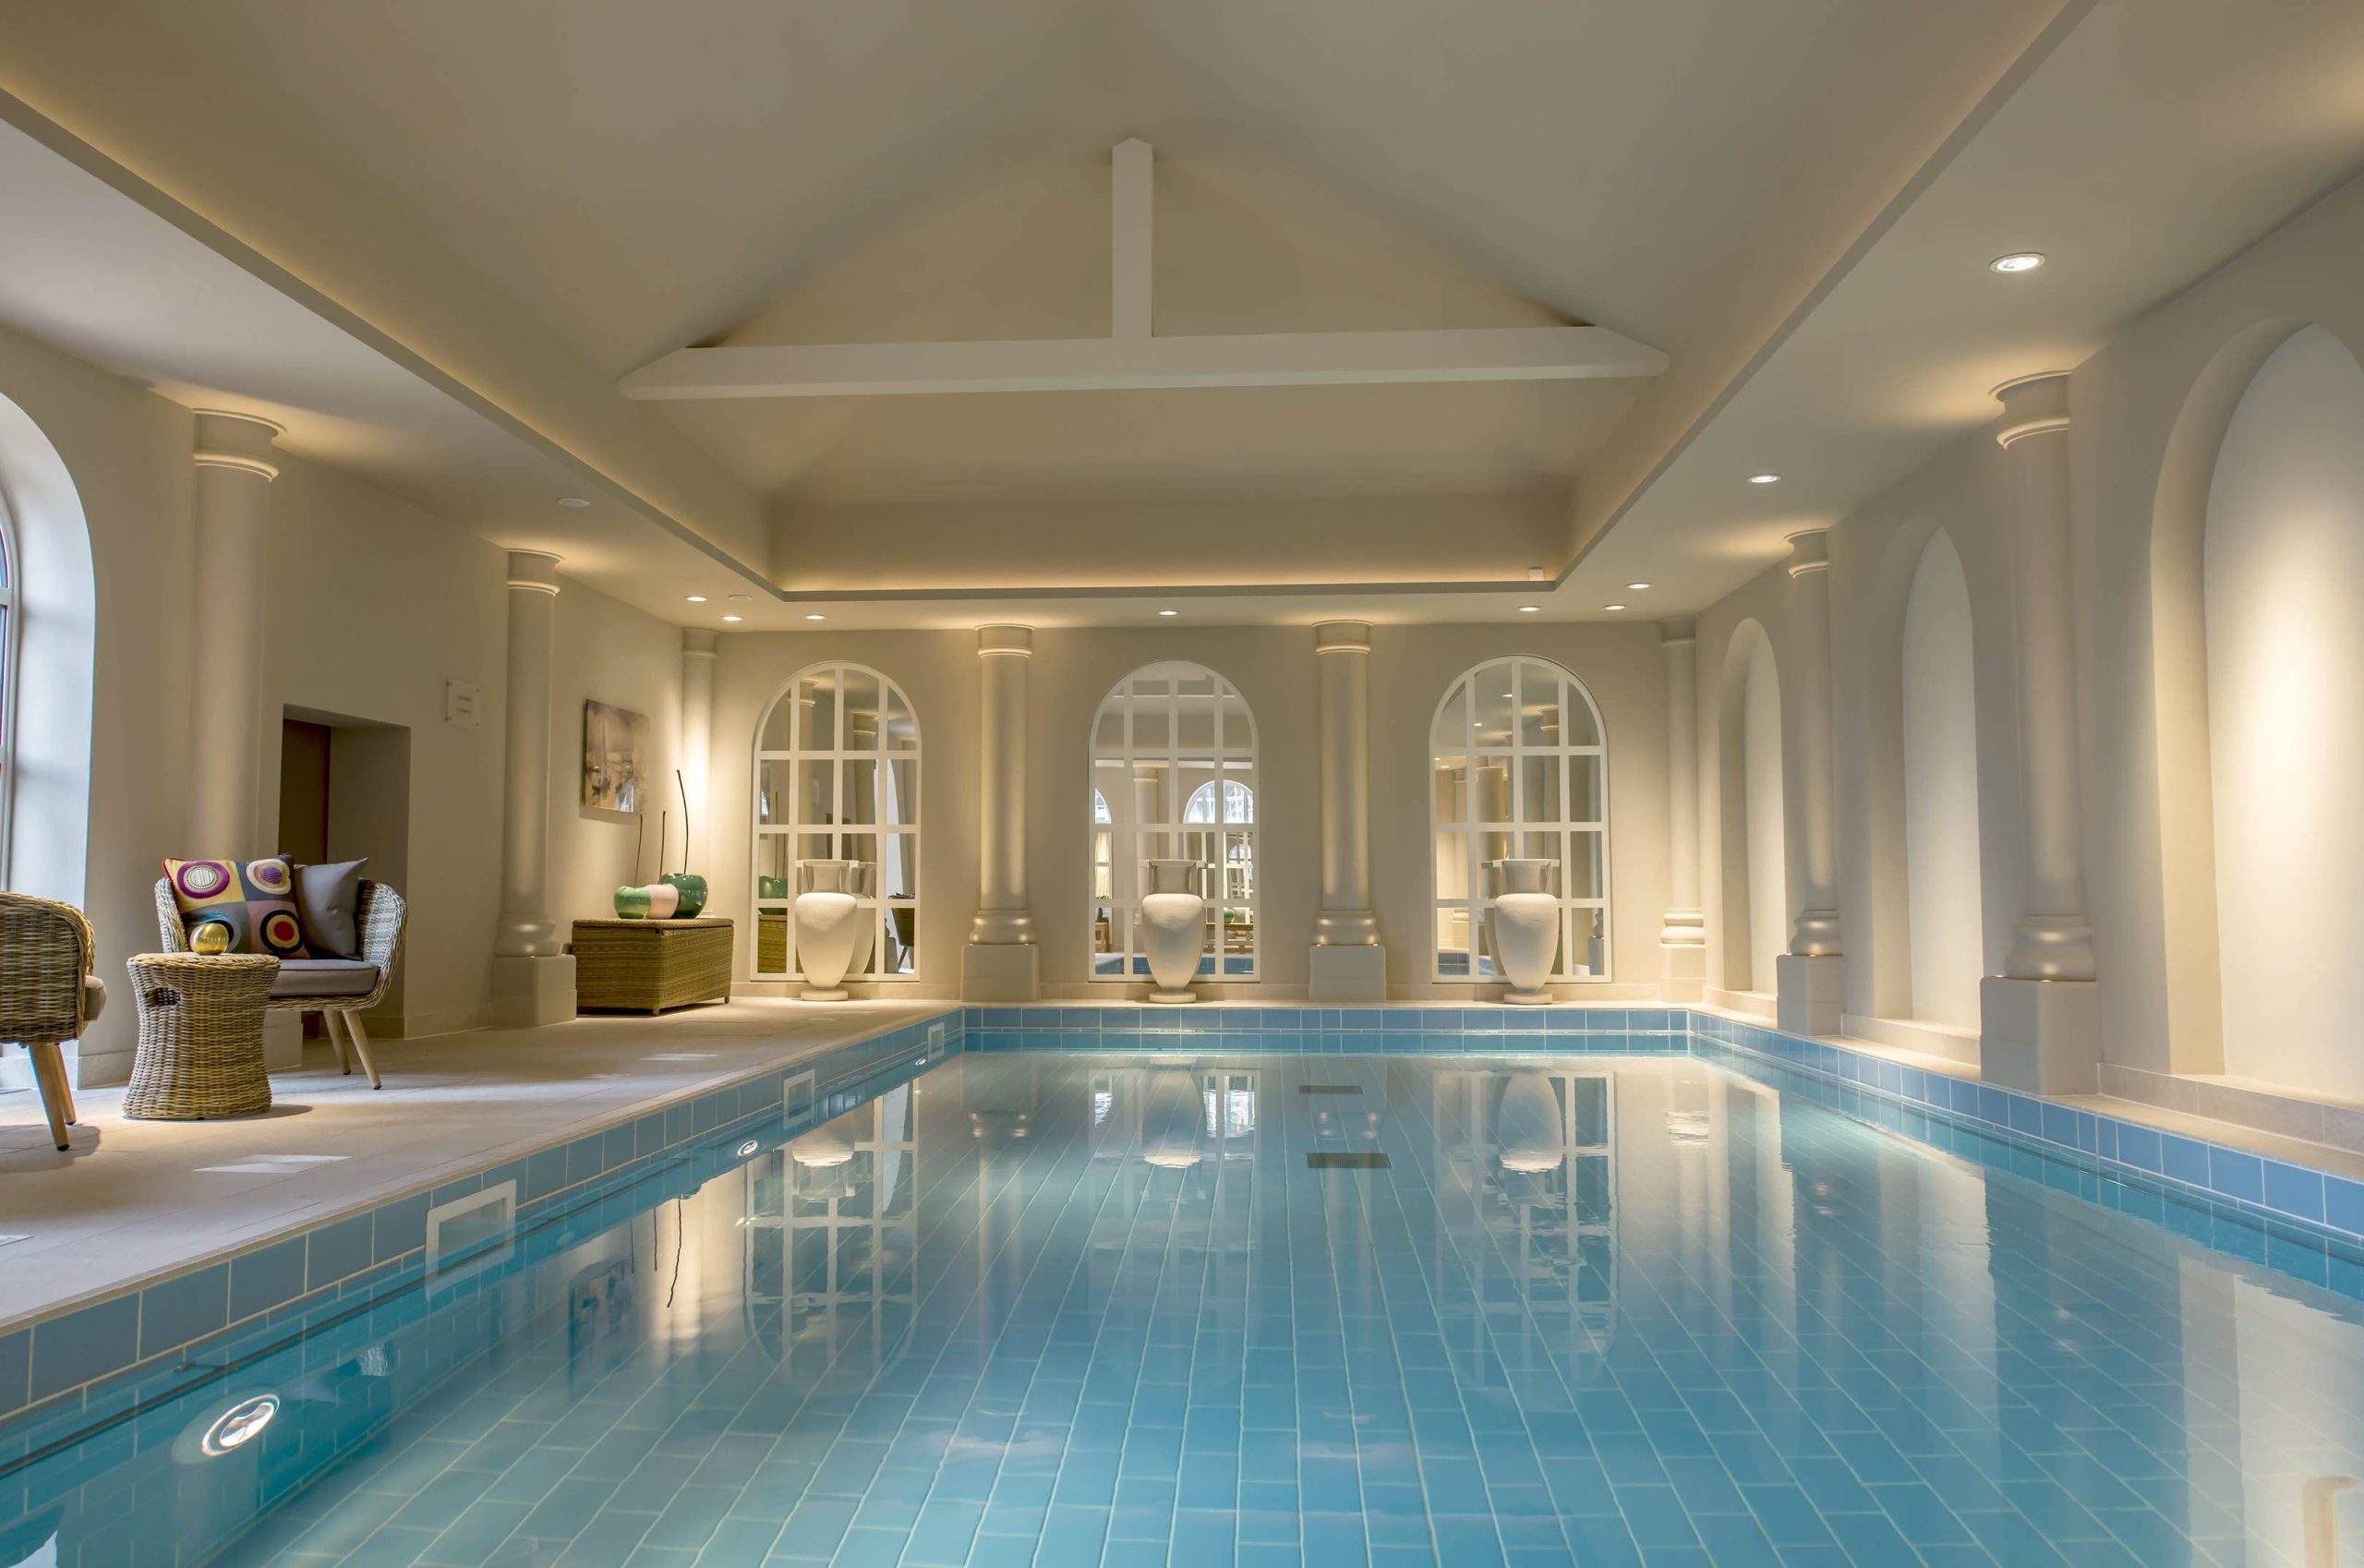 Spa Day Packages with Access to Pool/Sauna at our Sister spa St George’s